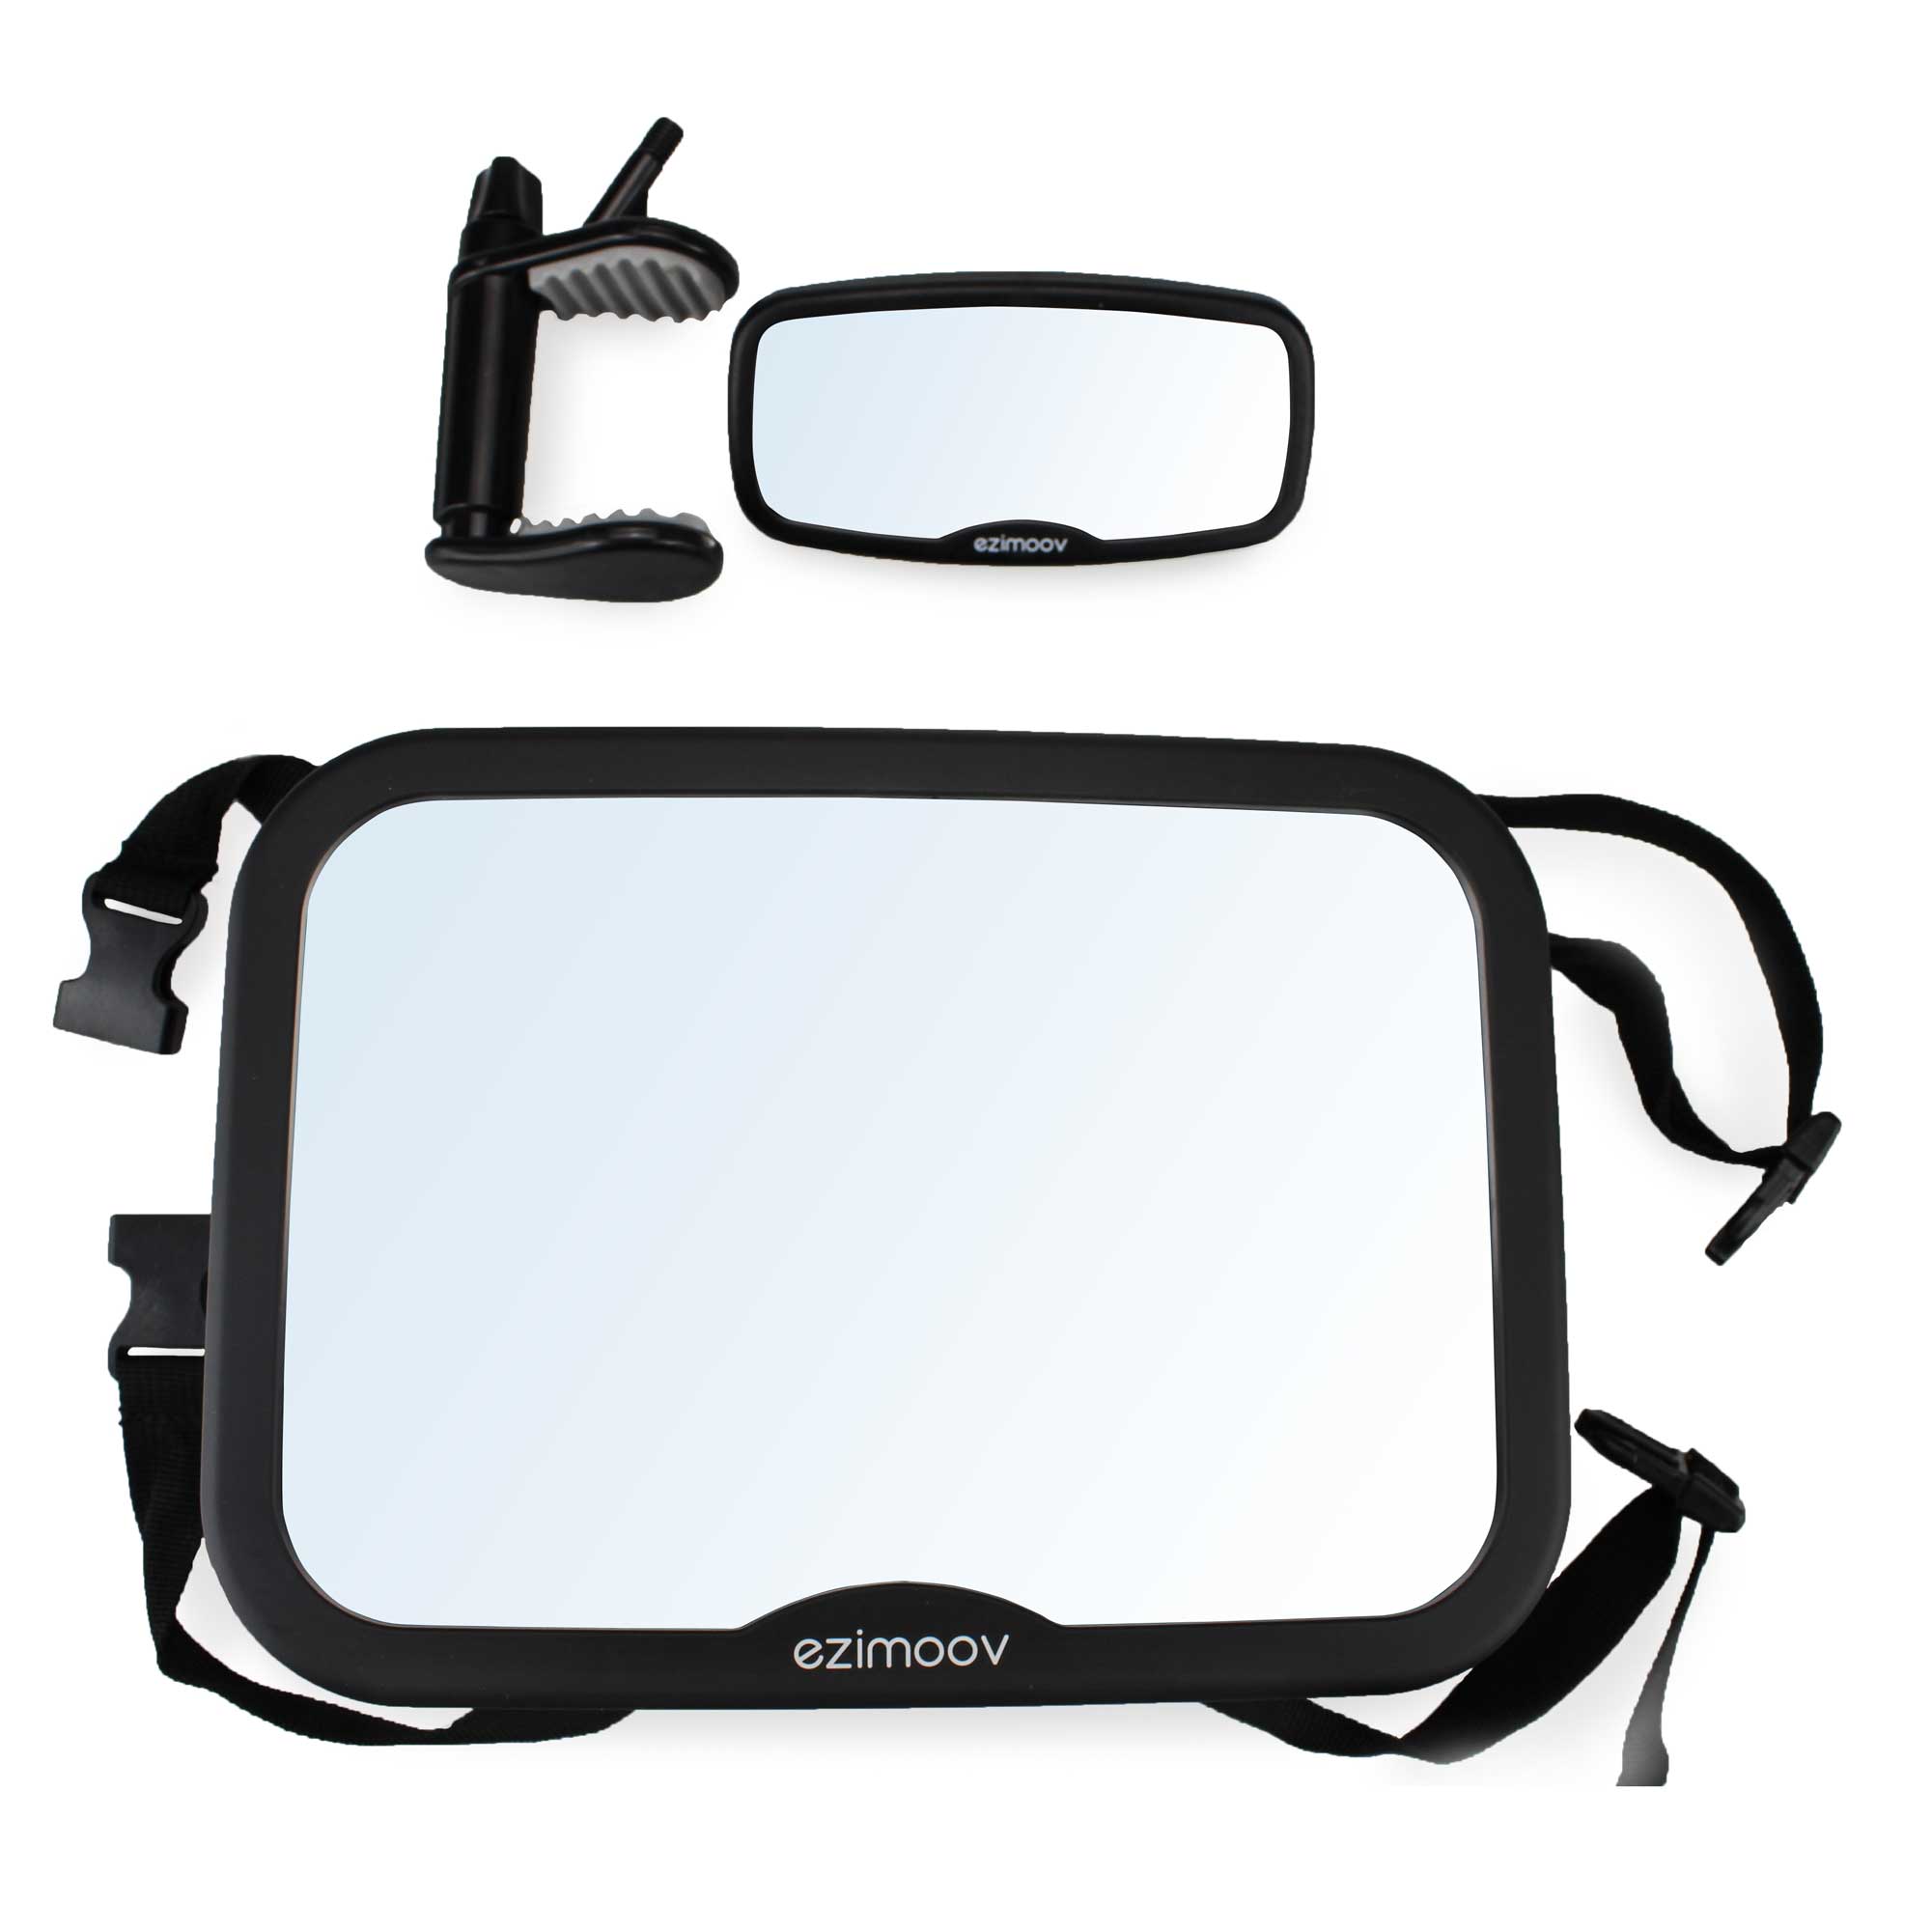 ezimoov-mirror-pack-product-view-white-background